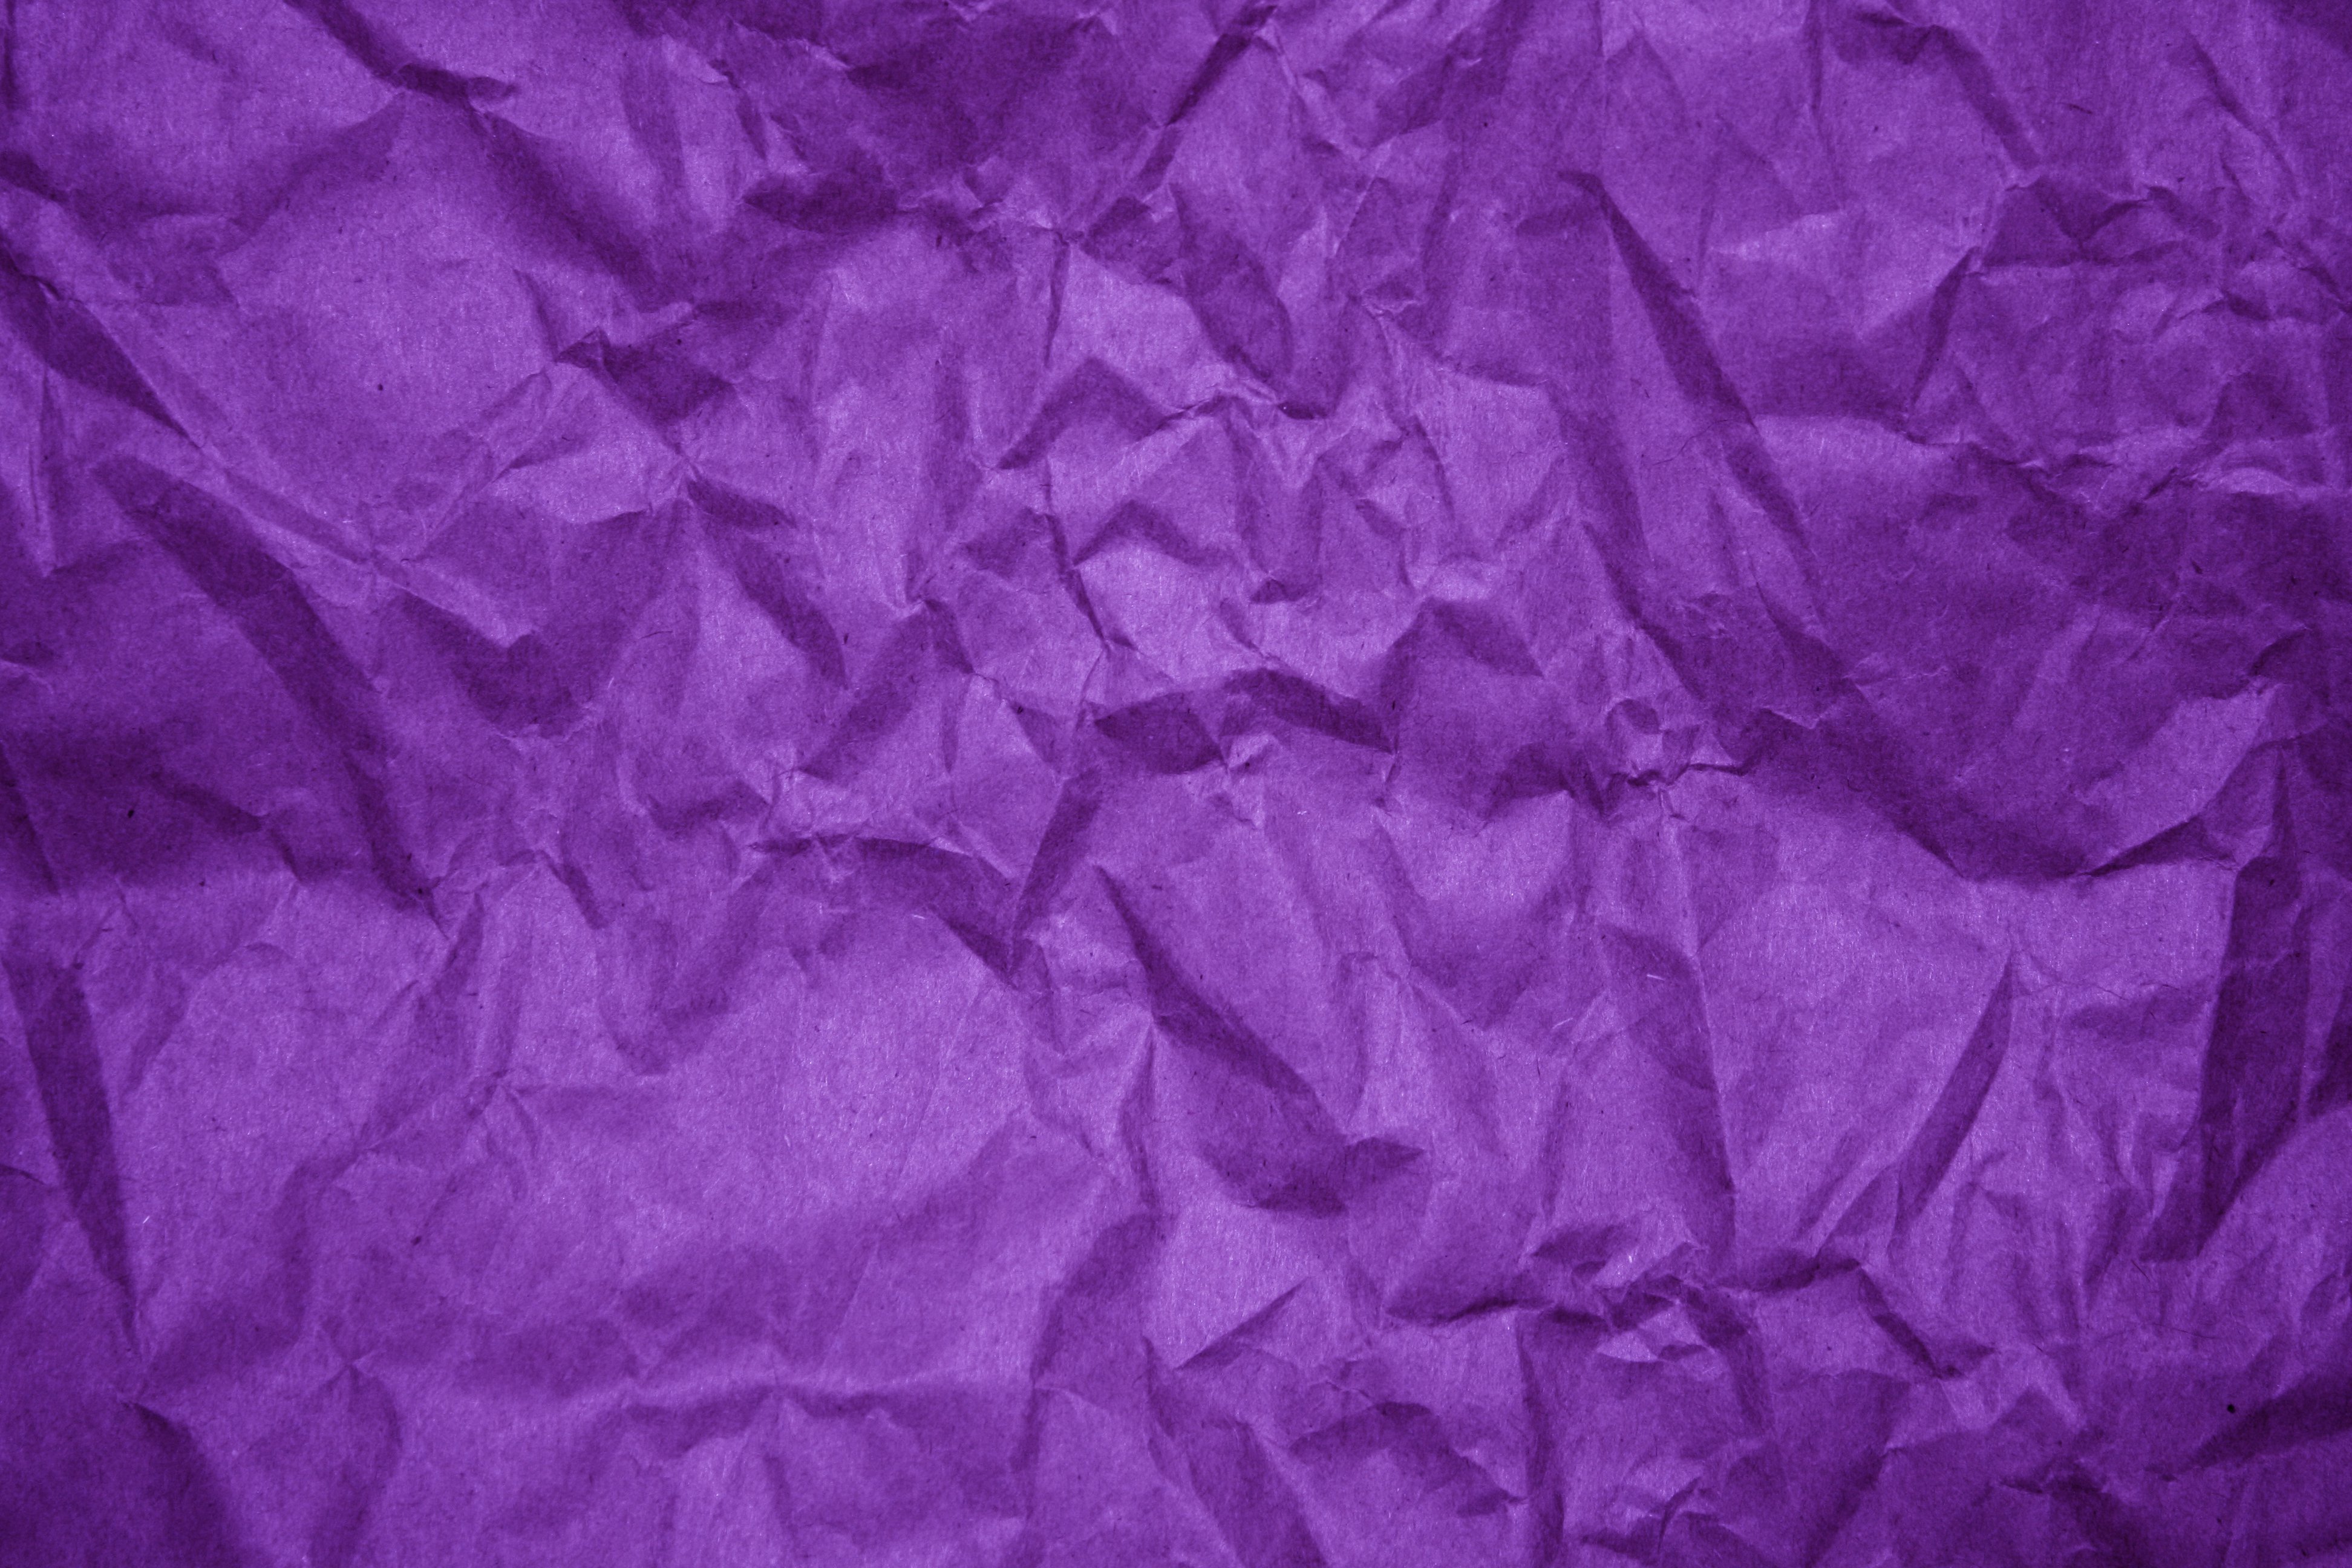 Crumpled Purple Paper Texture Picture | Free Photograph | Photos ...